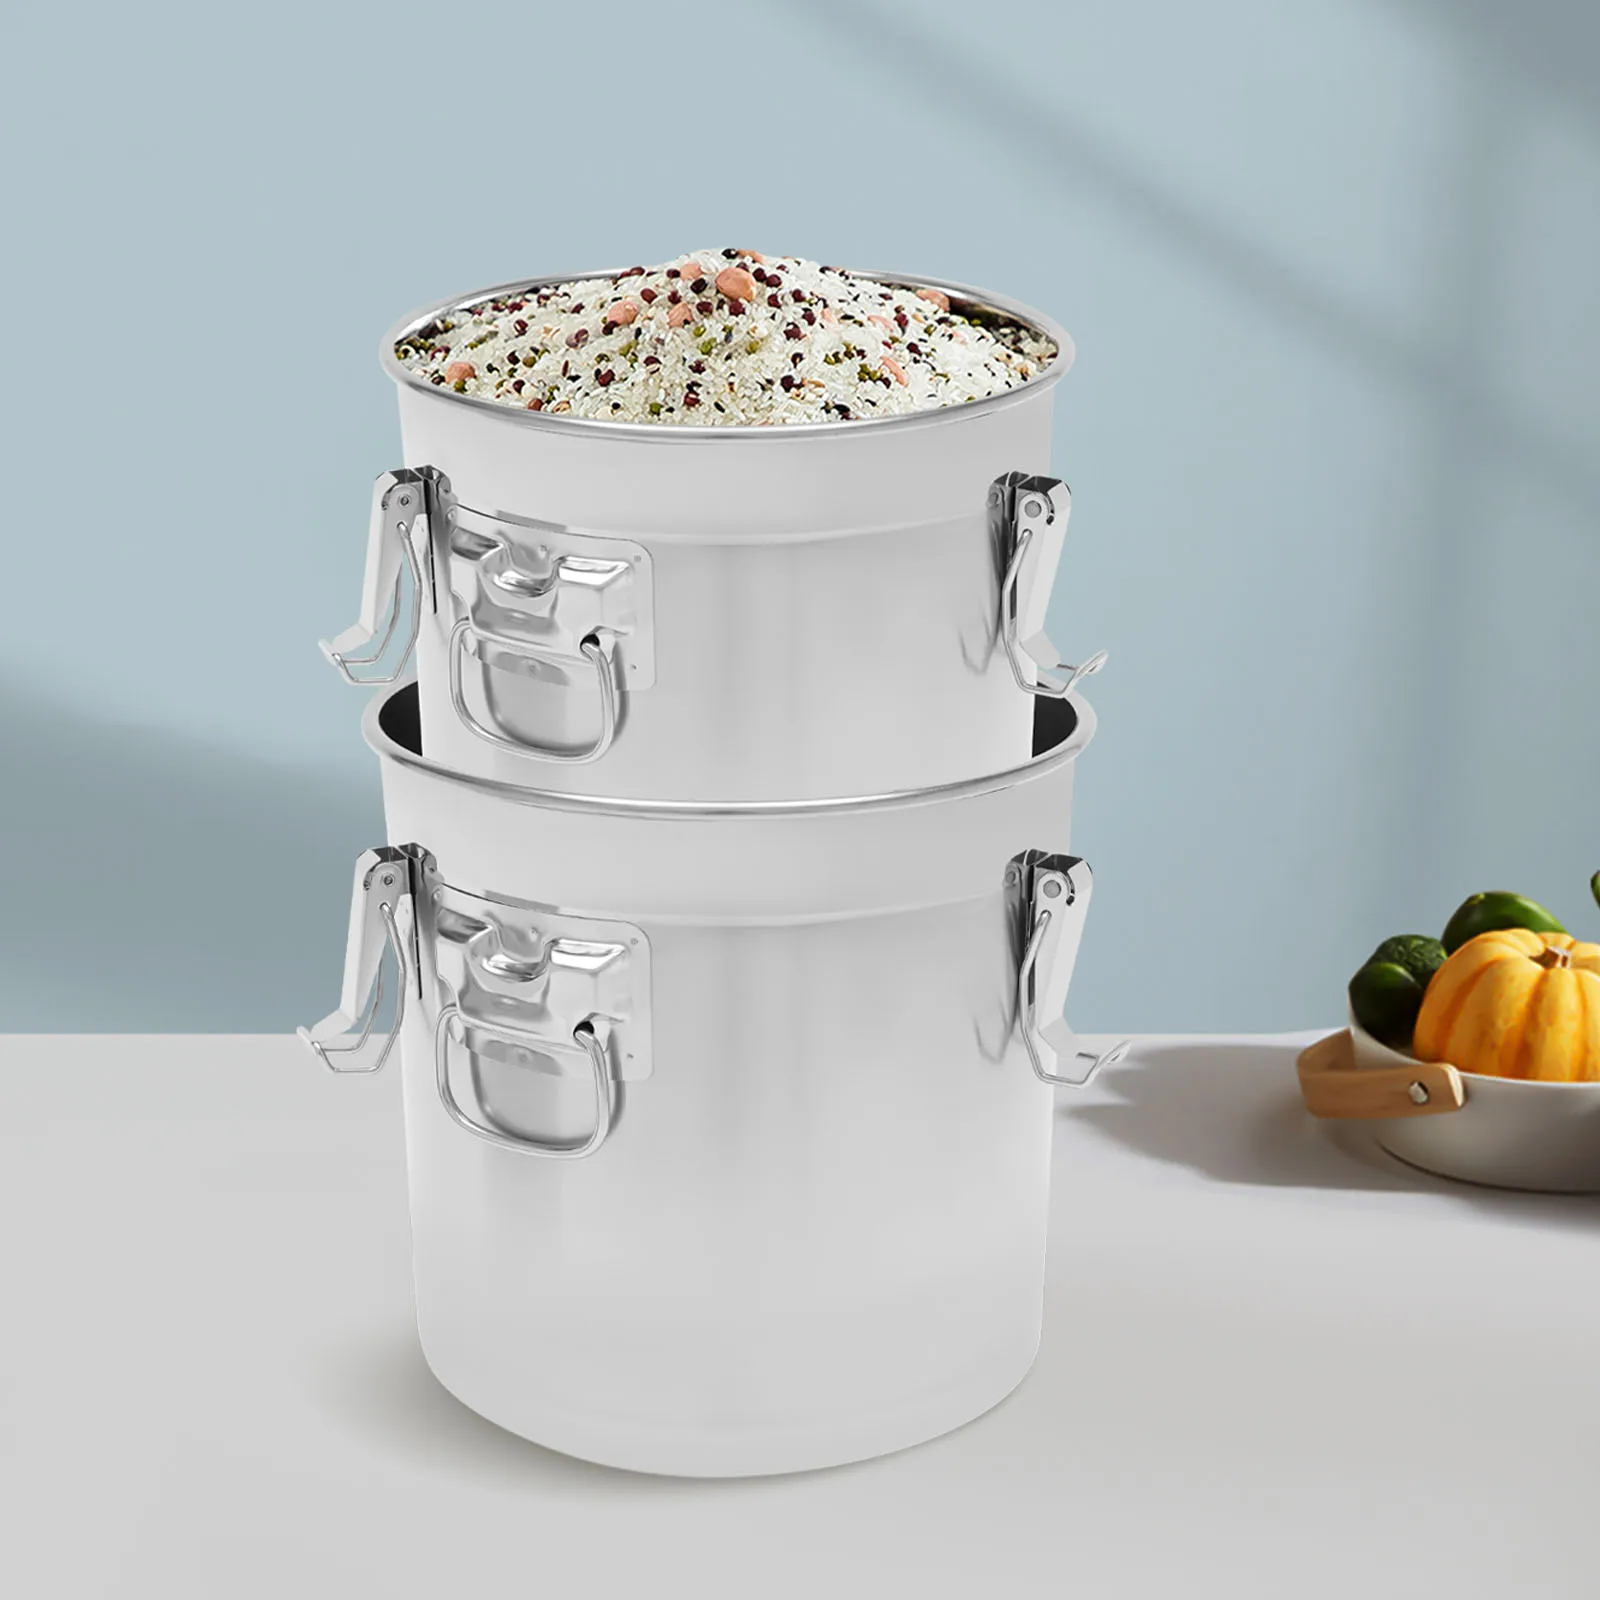 Large Flour Container Bucket